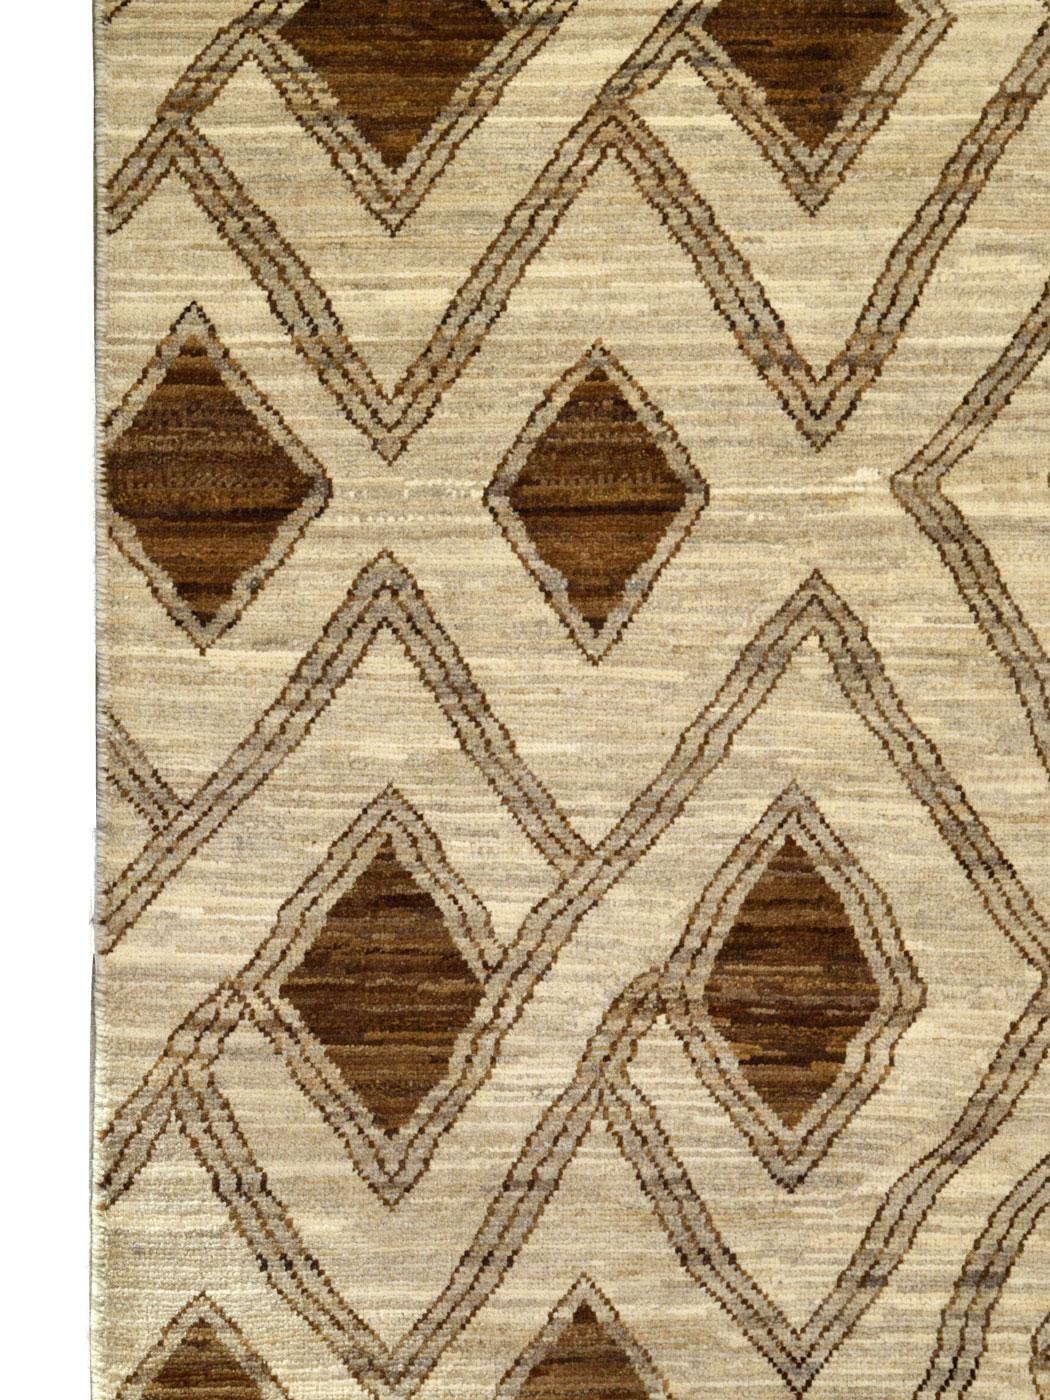 Vegetable Dyed Geometric Neutral Wool Carpet in Brown and Cream For Sale